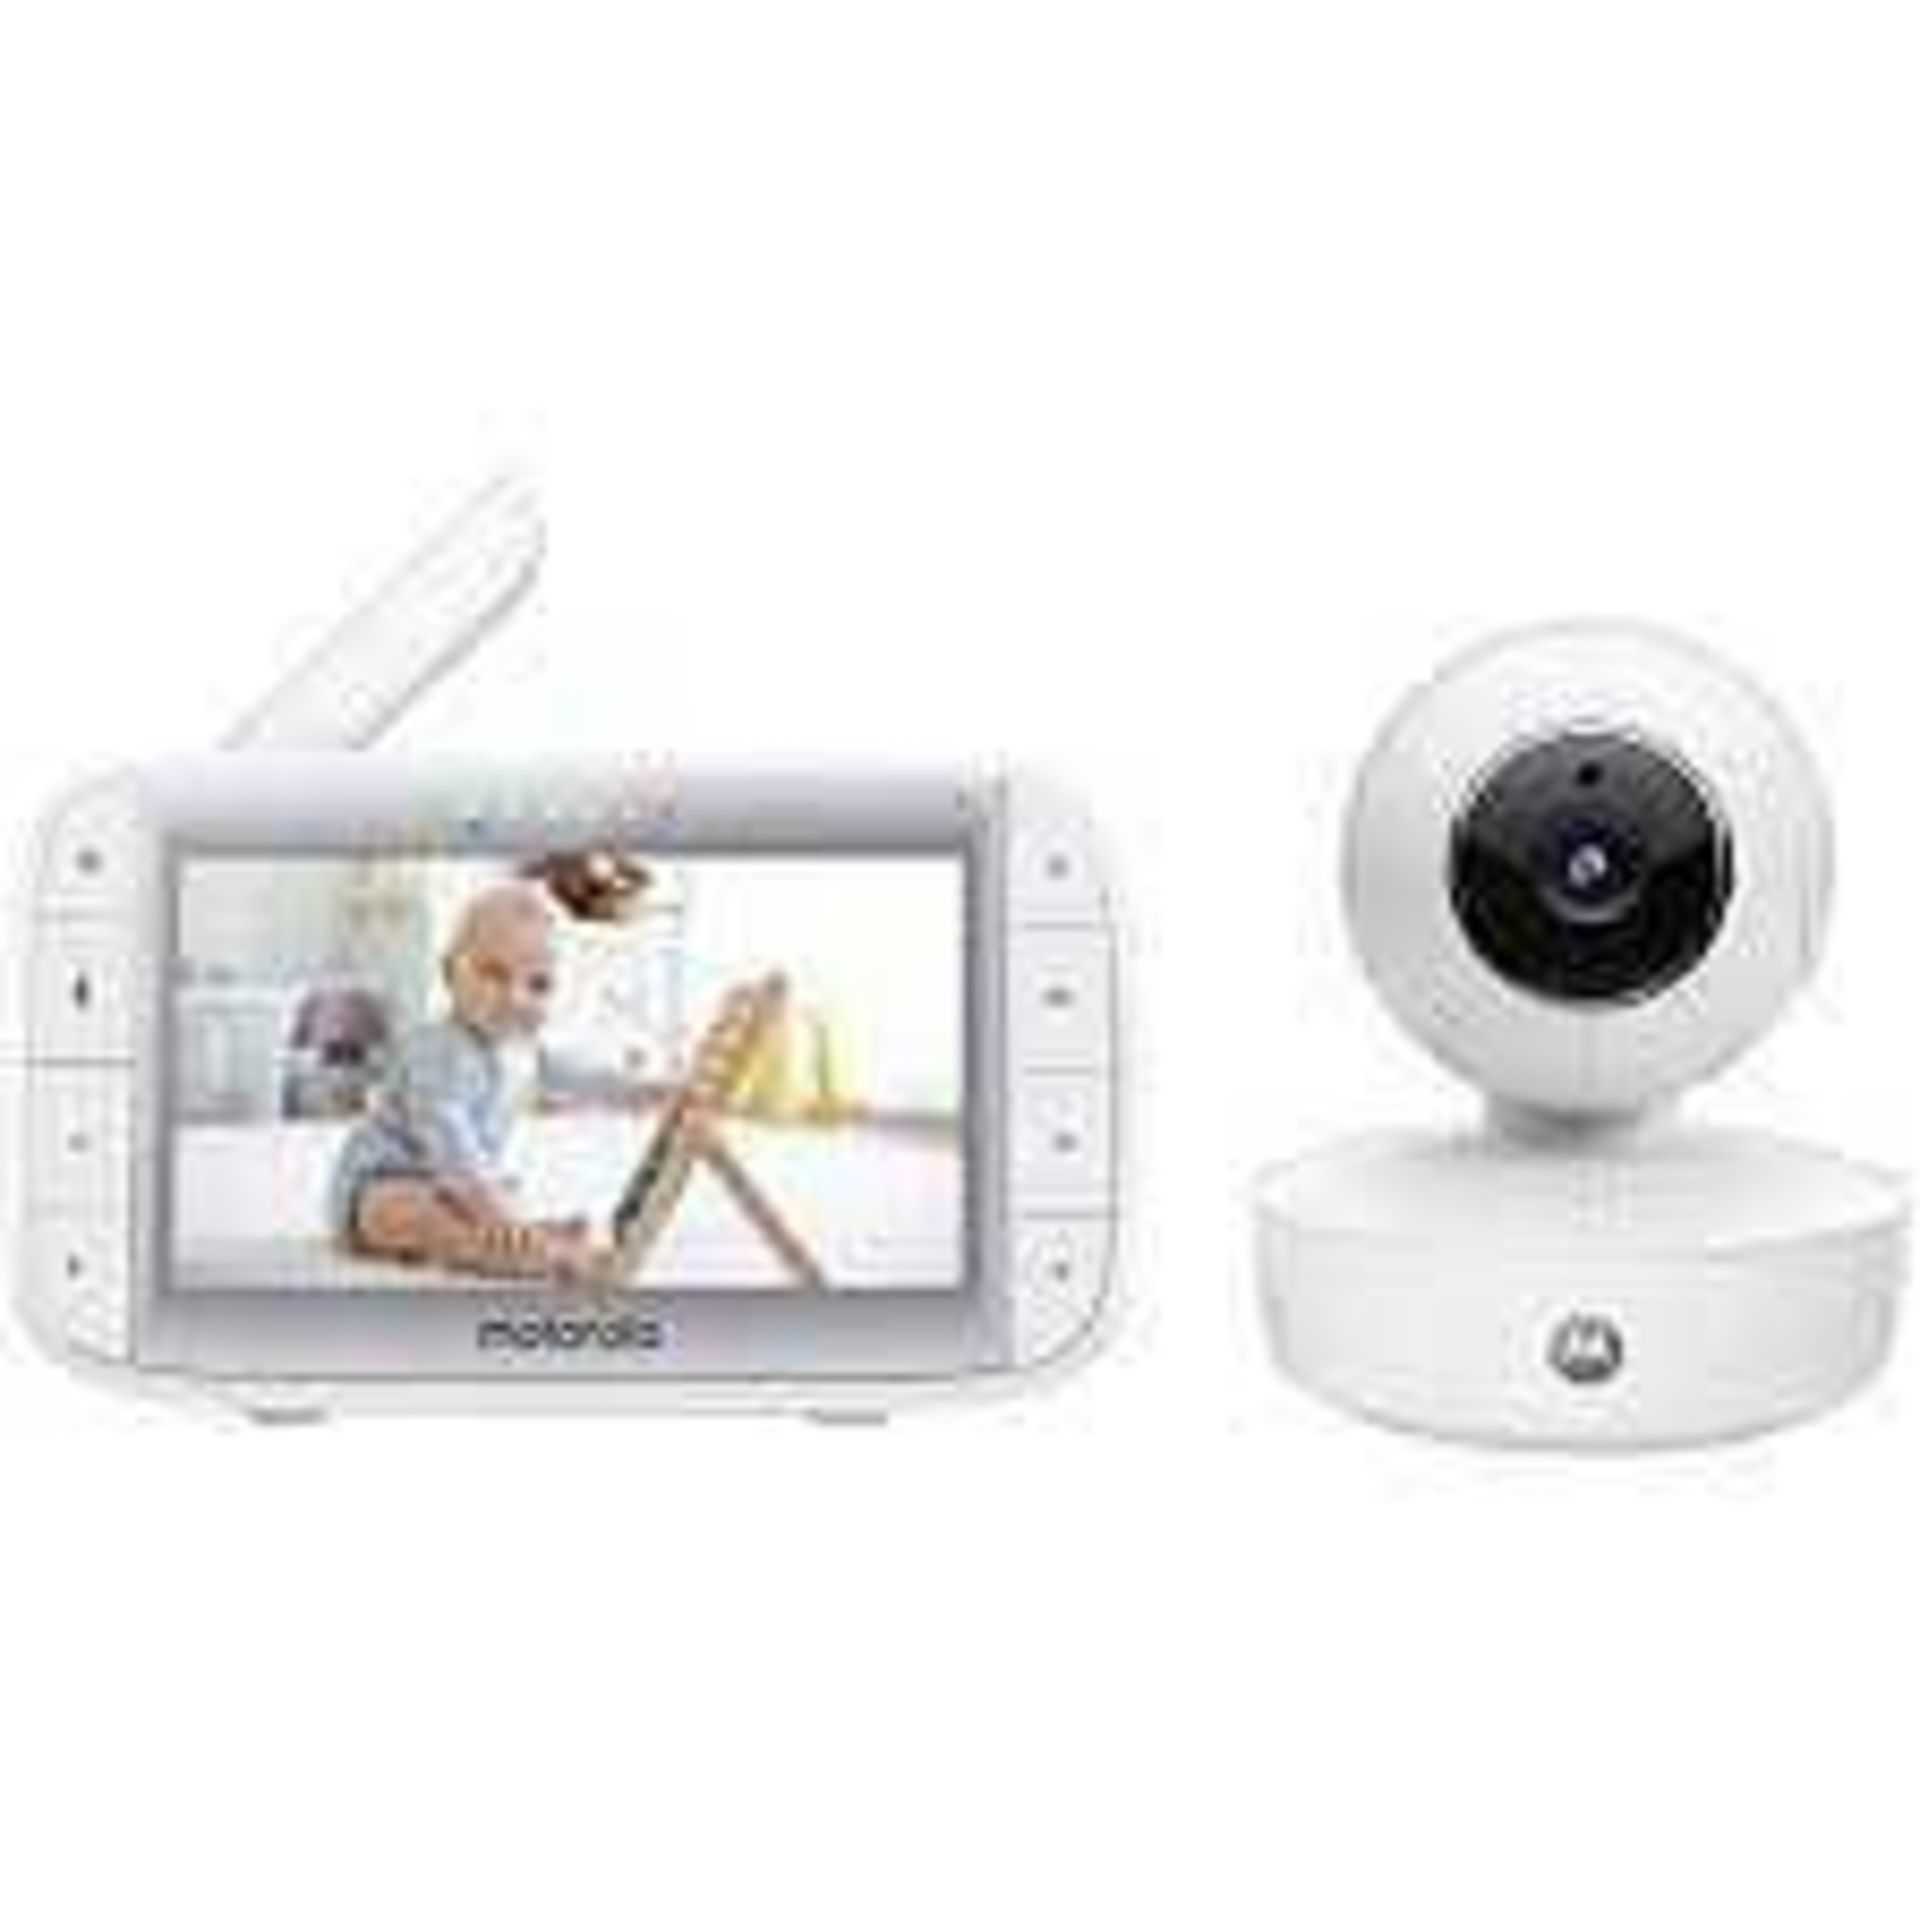 RRP £100 Boxed Motorola Mbp50 5 Inch Baby Video Monitor Set (117117) (Appraisals Are Available On